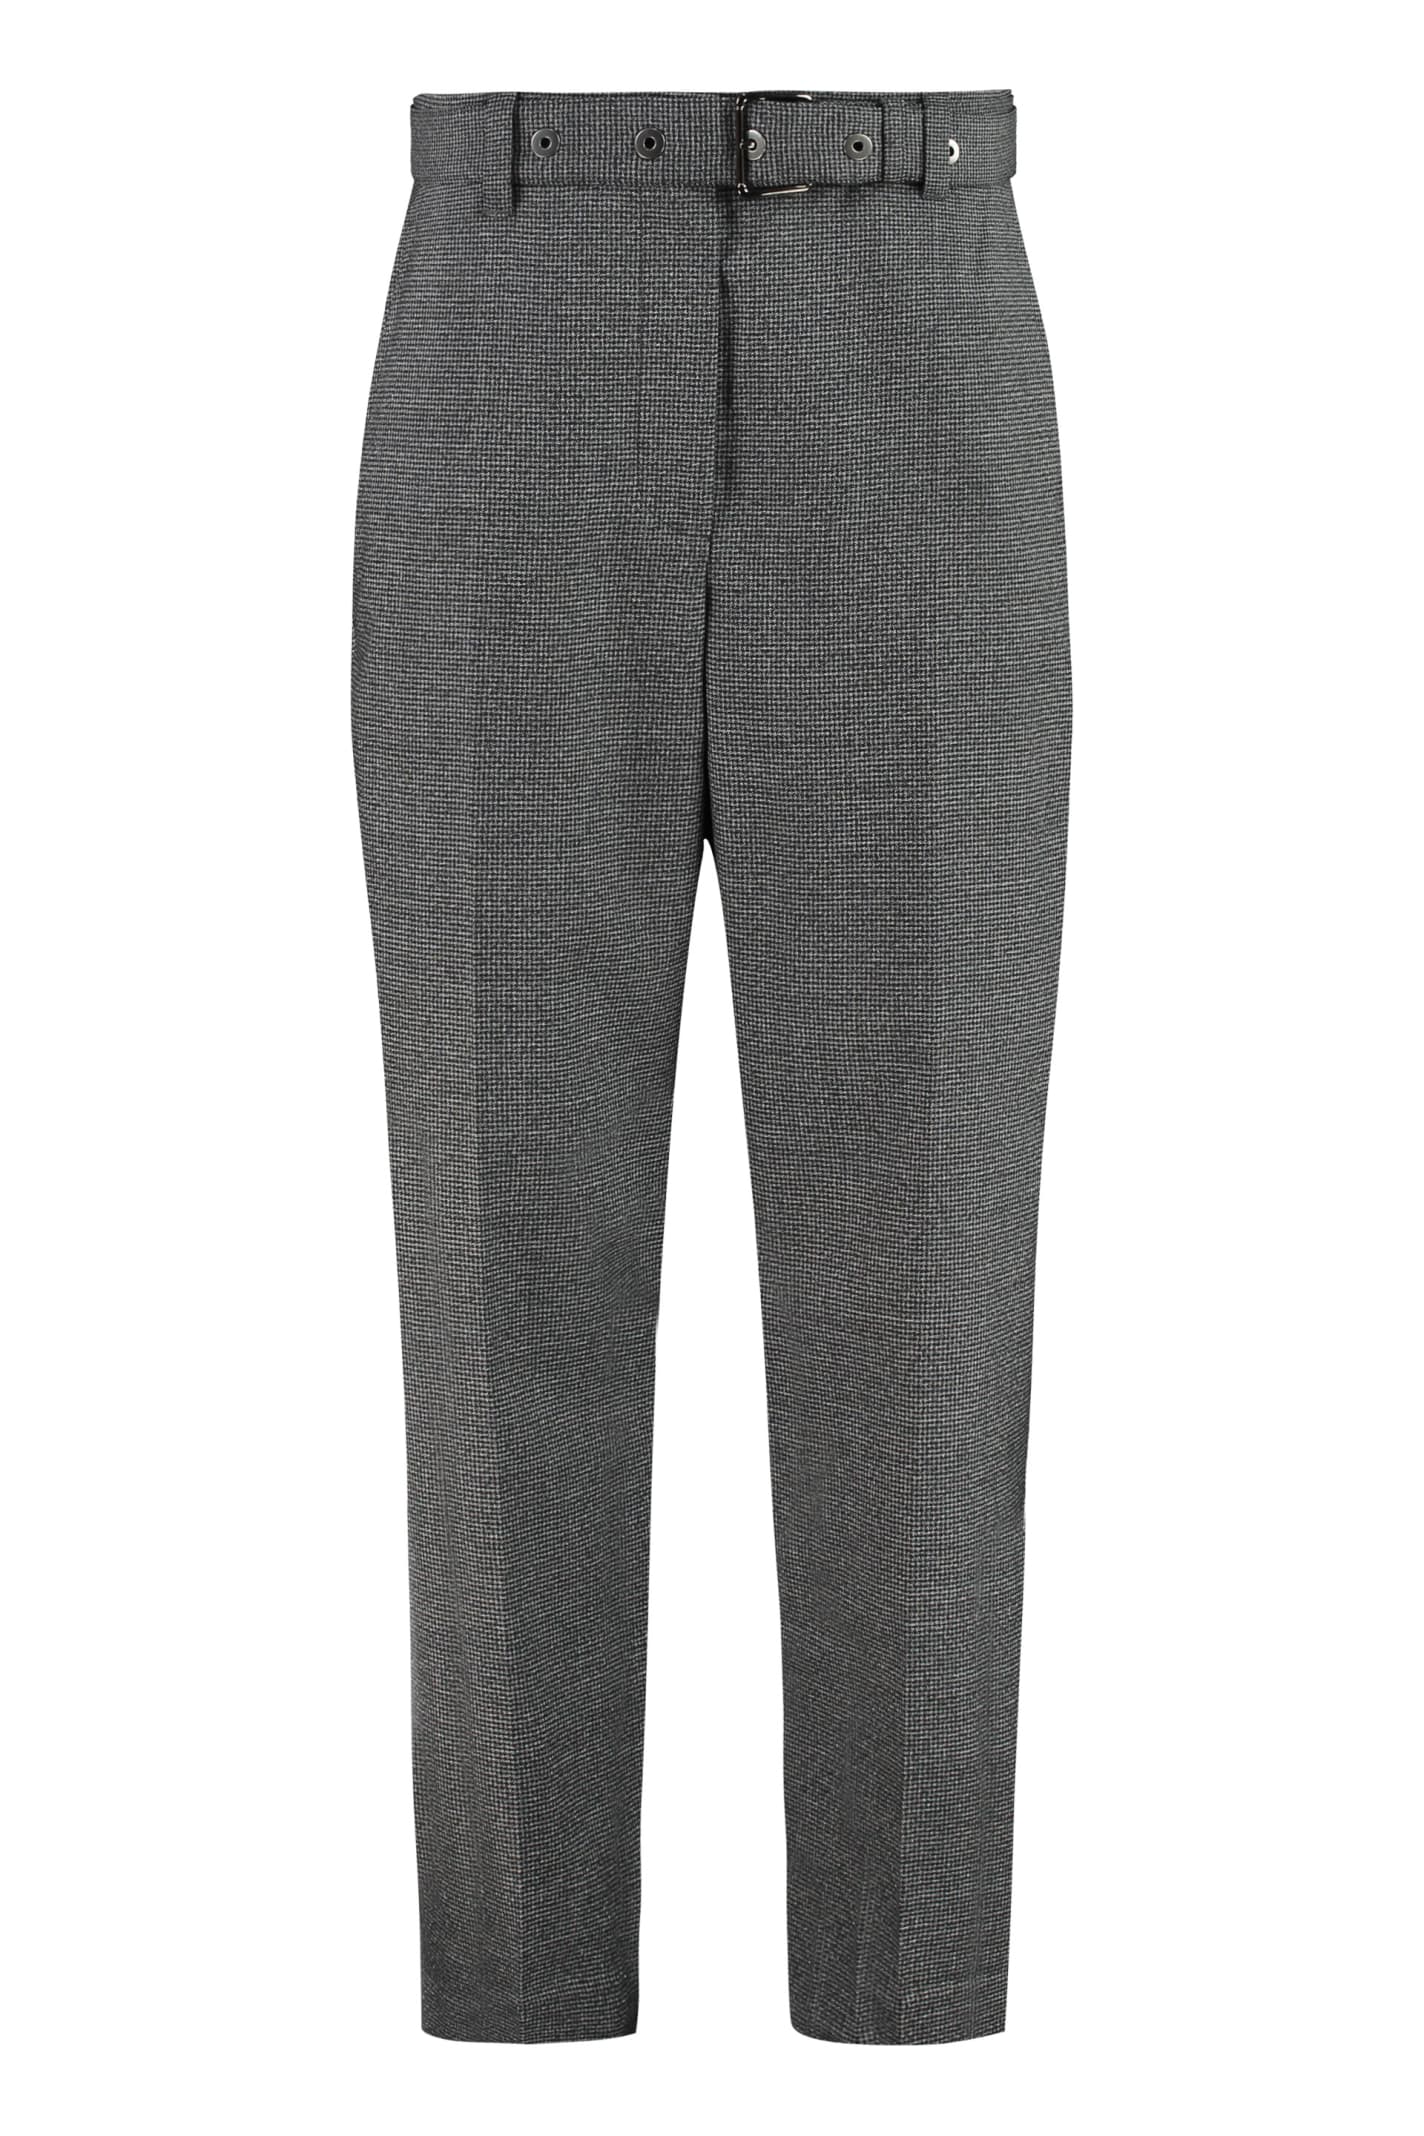 Brunello Cucinelli Micro Houndstooth Trousers